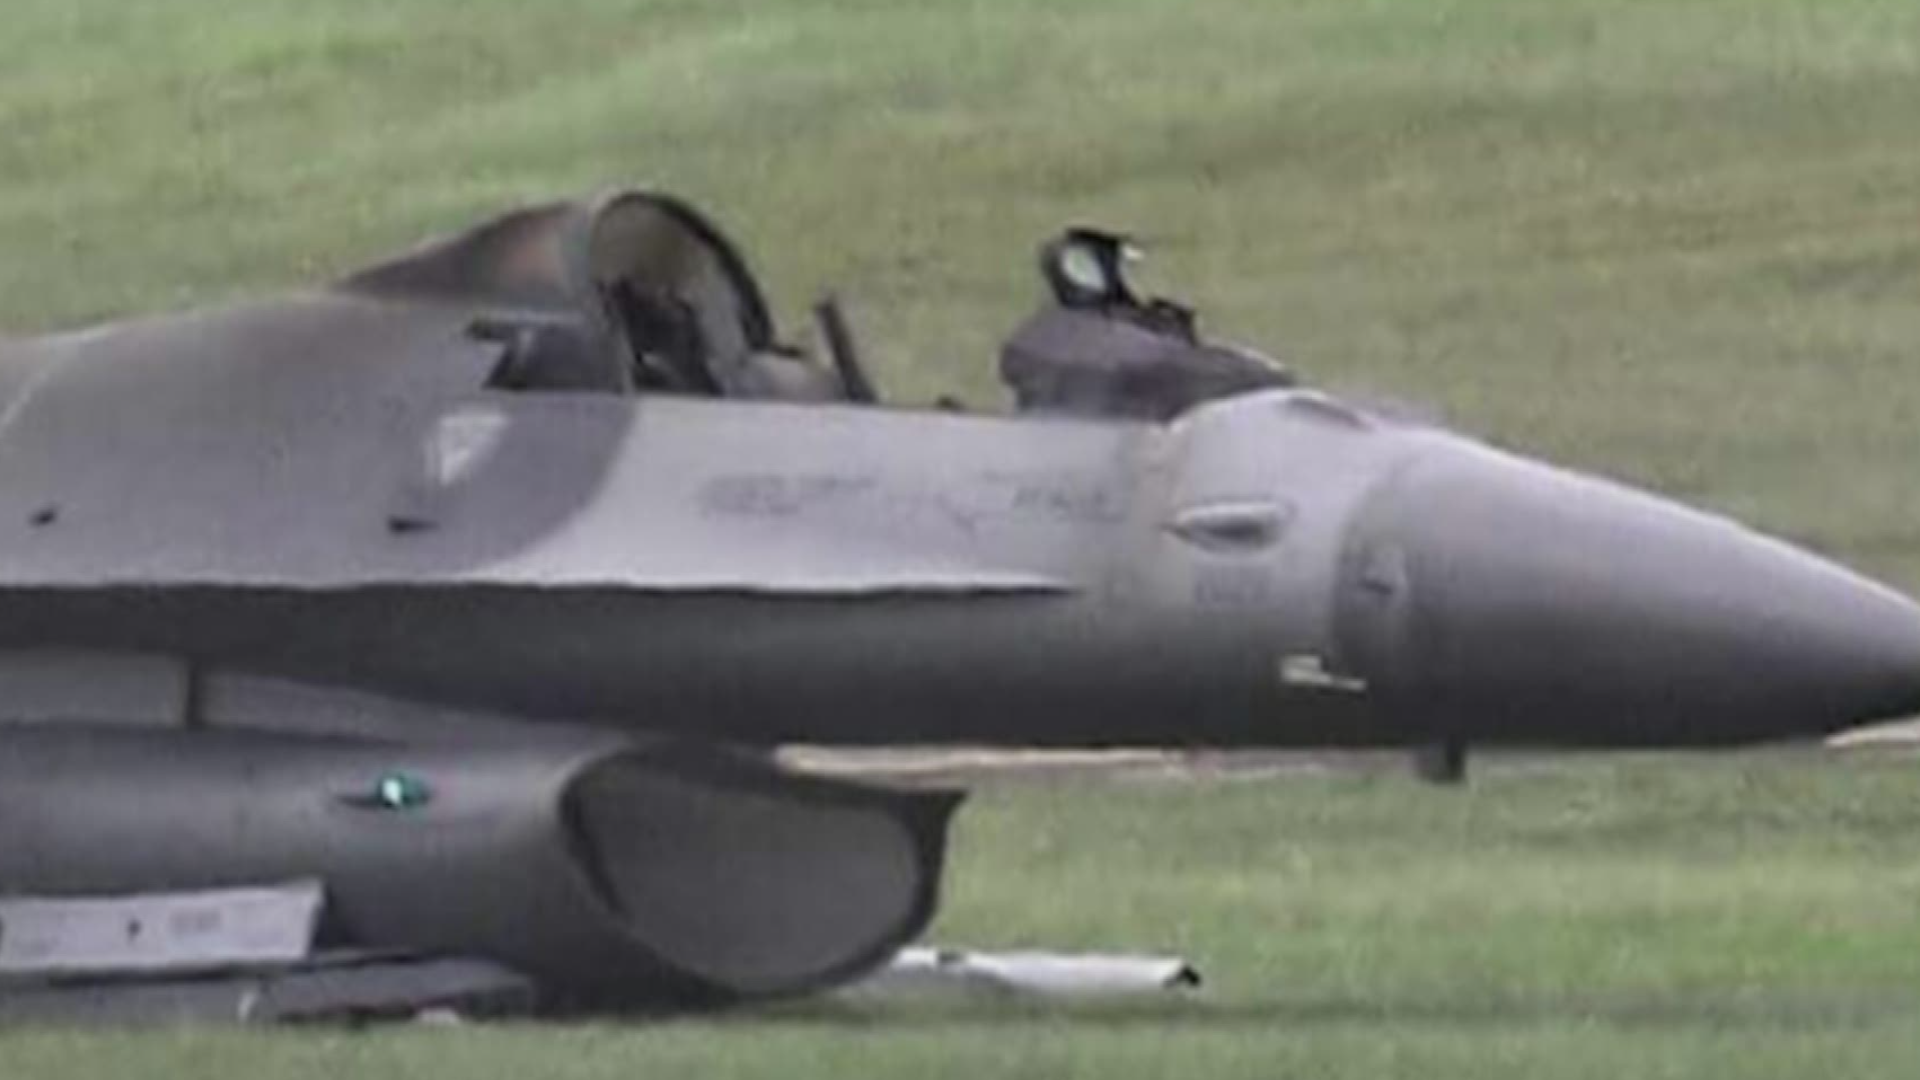 A pilot ejected from an F-16 jet with ammunition on board when it crashed and caught fire at Ellington Field Wednesday. The pilot, who is from a detachment of the 138th Fighter Wing, crashed on takeoff during a training flight. "It was extremely dramatic 